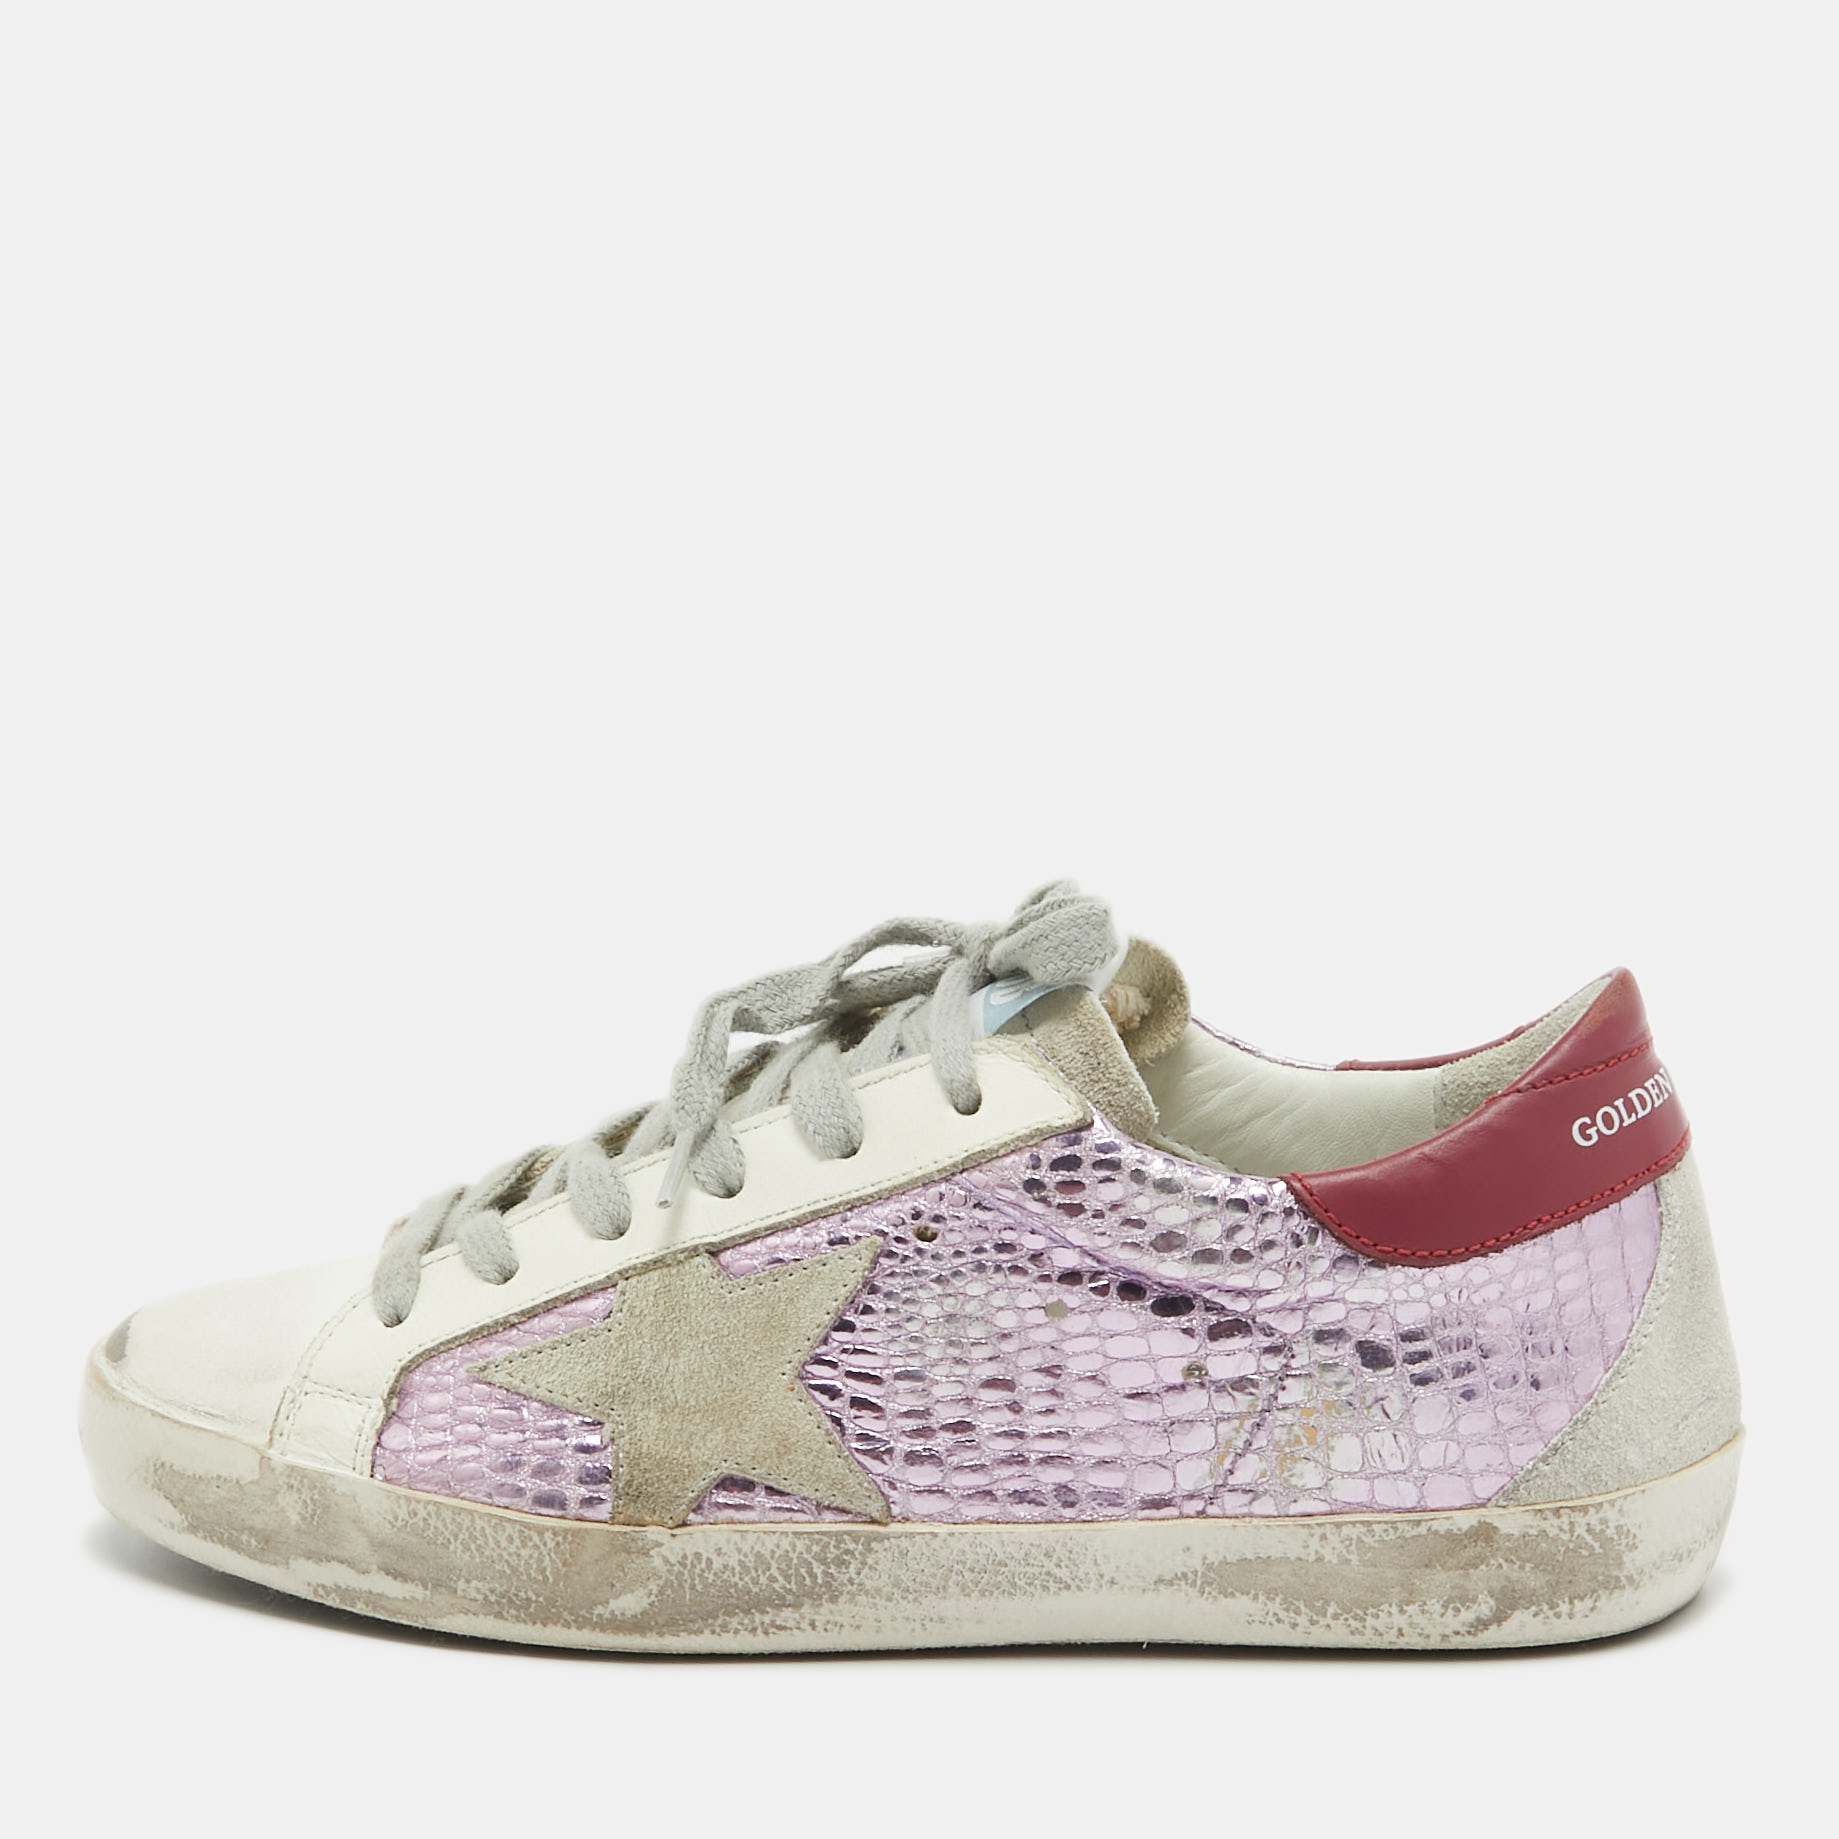 Golden goose multicolor leather and suede star lace up  sneakers size 35